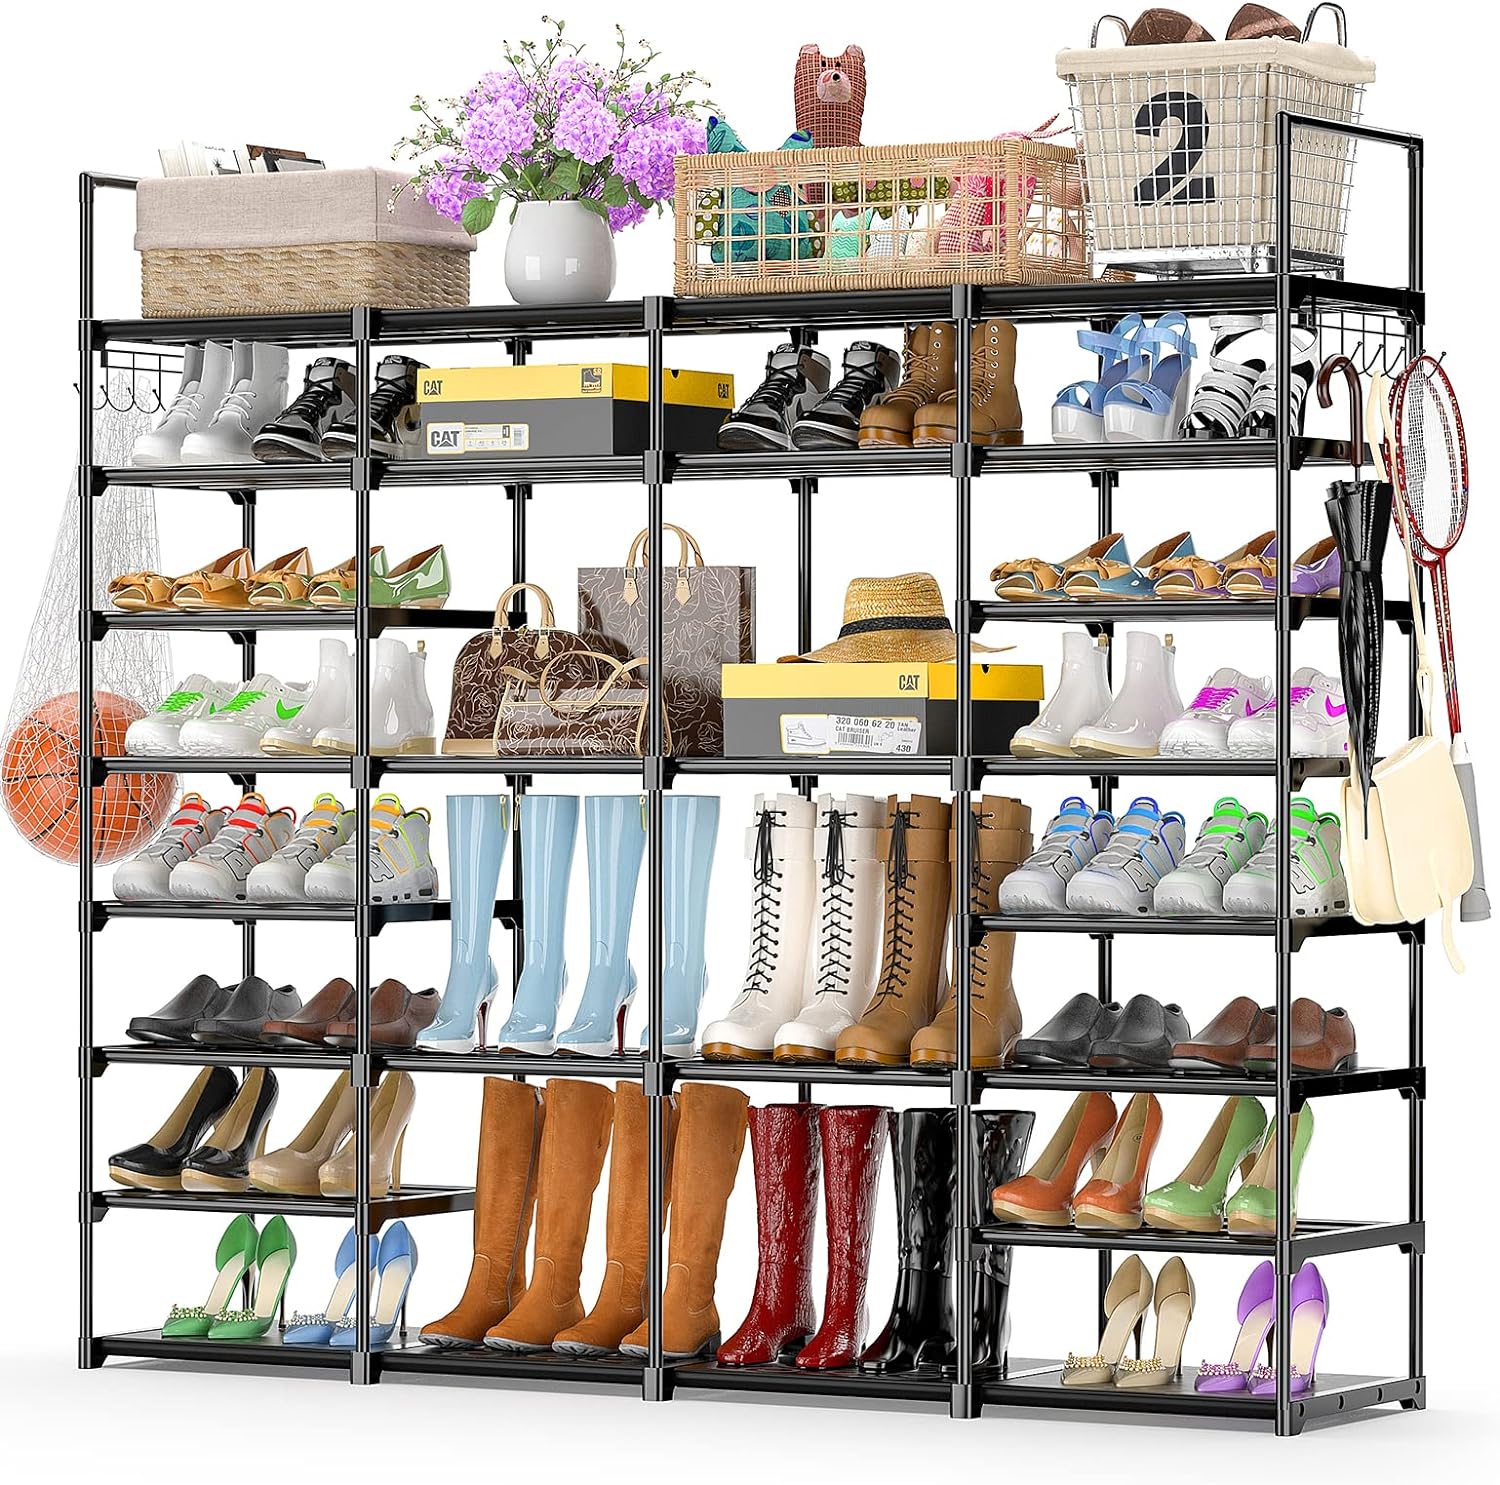 Wolfb Large Shoe Rack Shoe Organizer for 62-66 Pairs Shoes and Boots